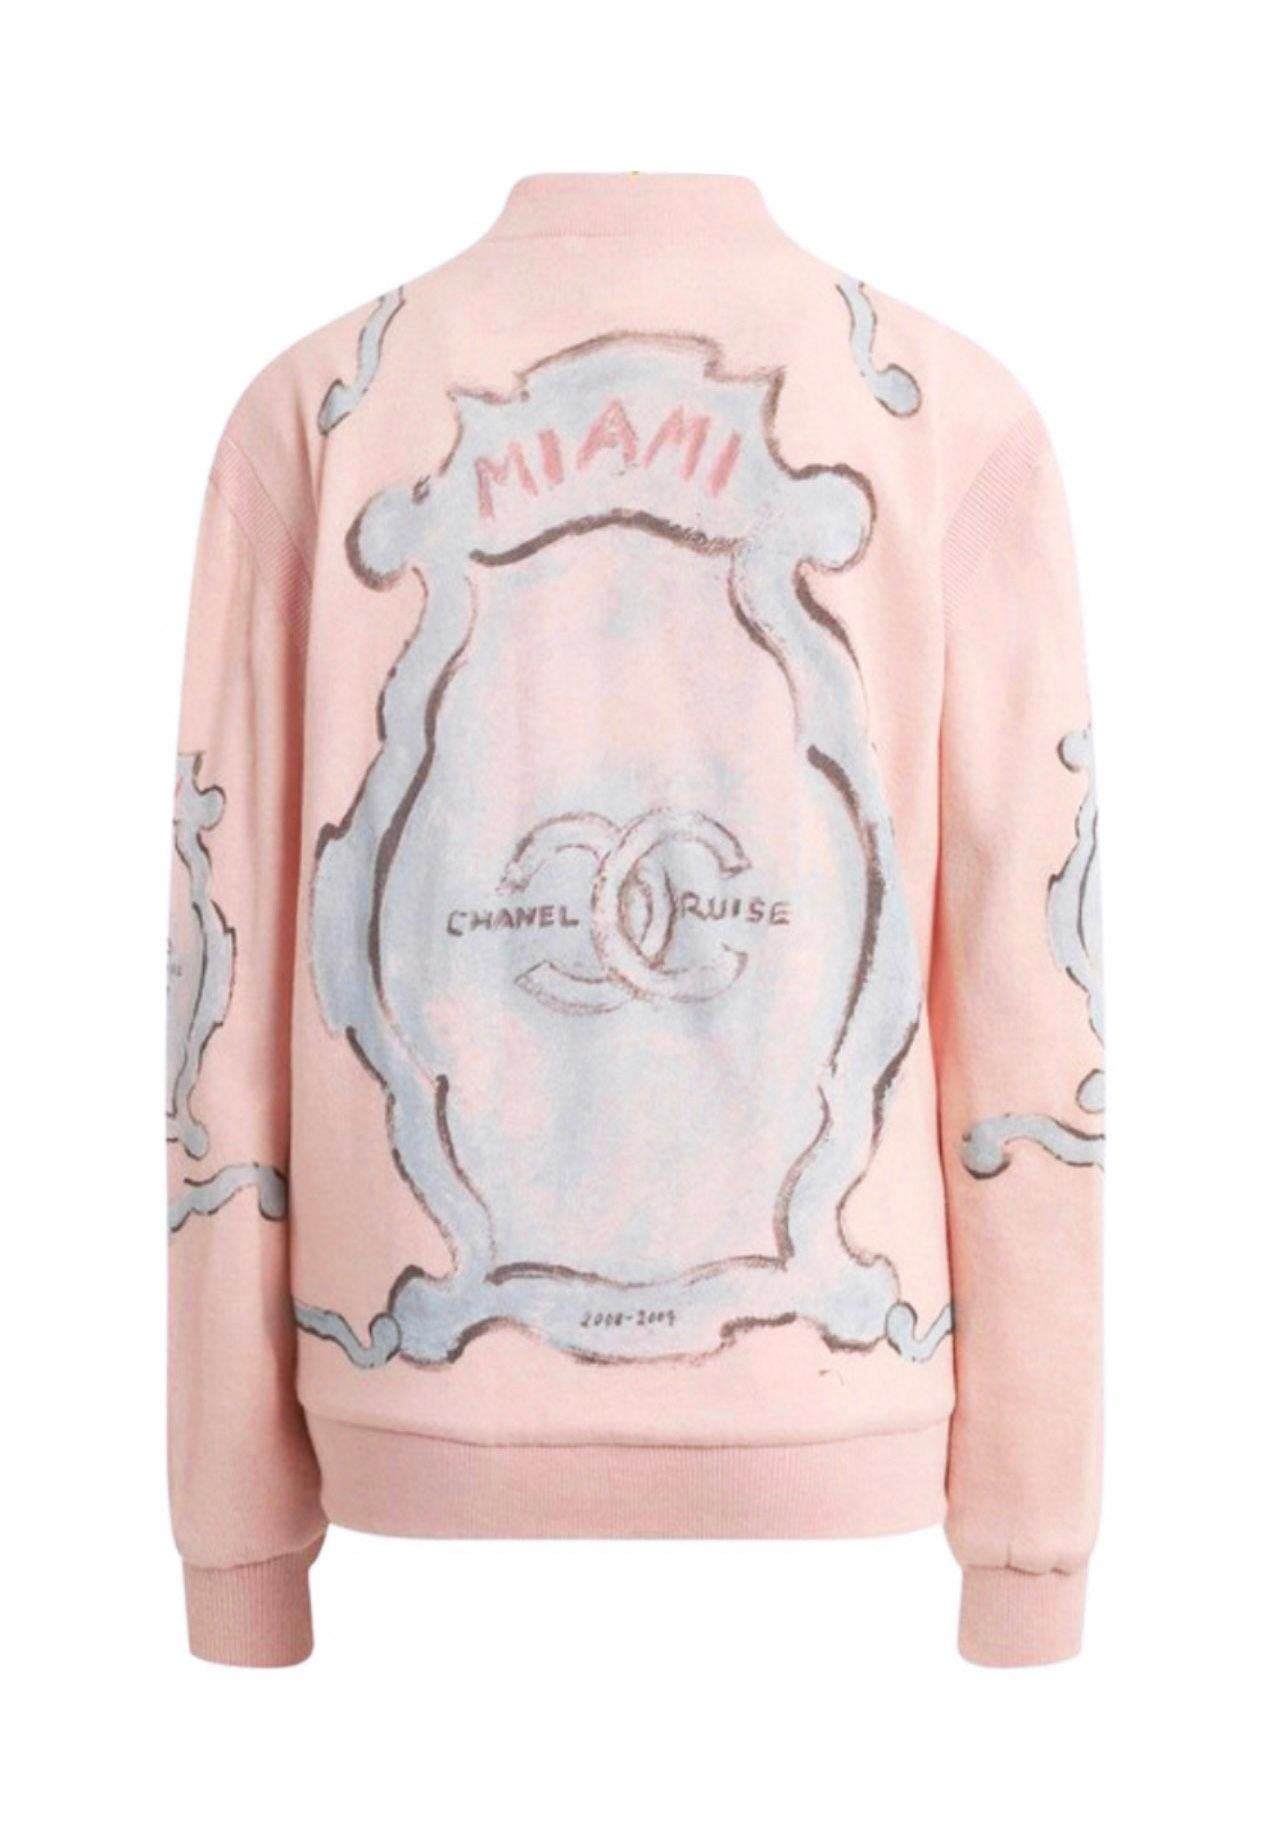 Rarest Chanel pastel pink cashmere bomber jacket from Runway of Paris / MIAMI Cruise Collection
- CC ''Chanel'' silver-tone buttons
- composition 100% cashmere
- CC logo lining
Size mark 36 FR. Condition is pristine, no pulls, no signs of wear